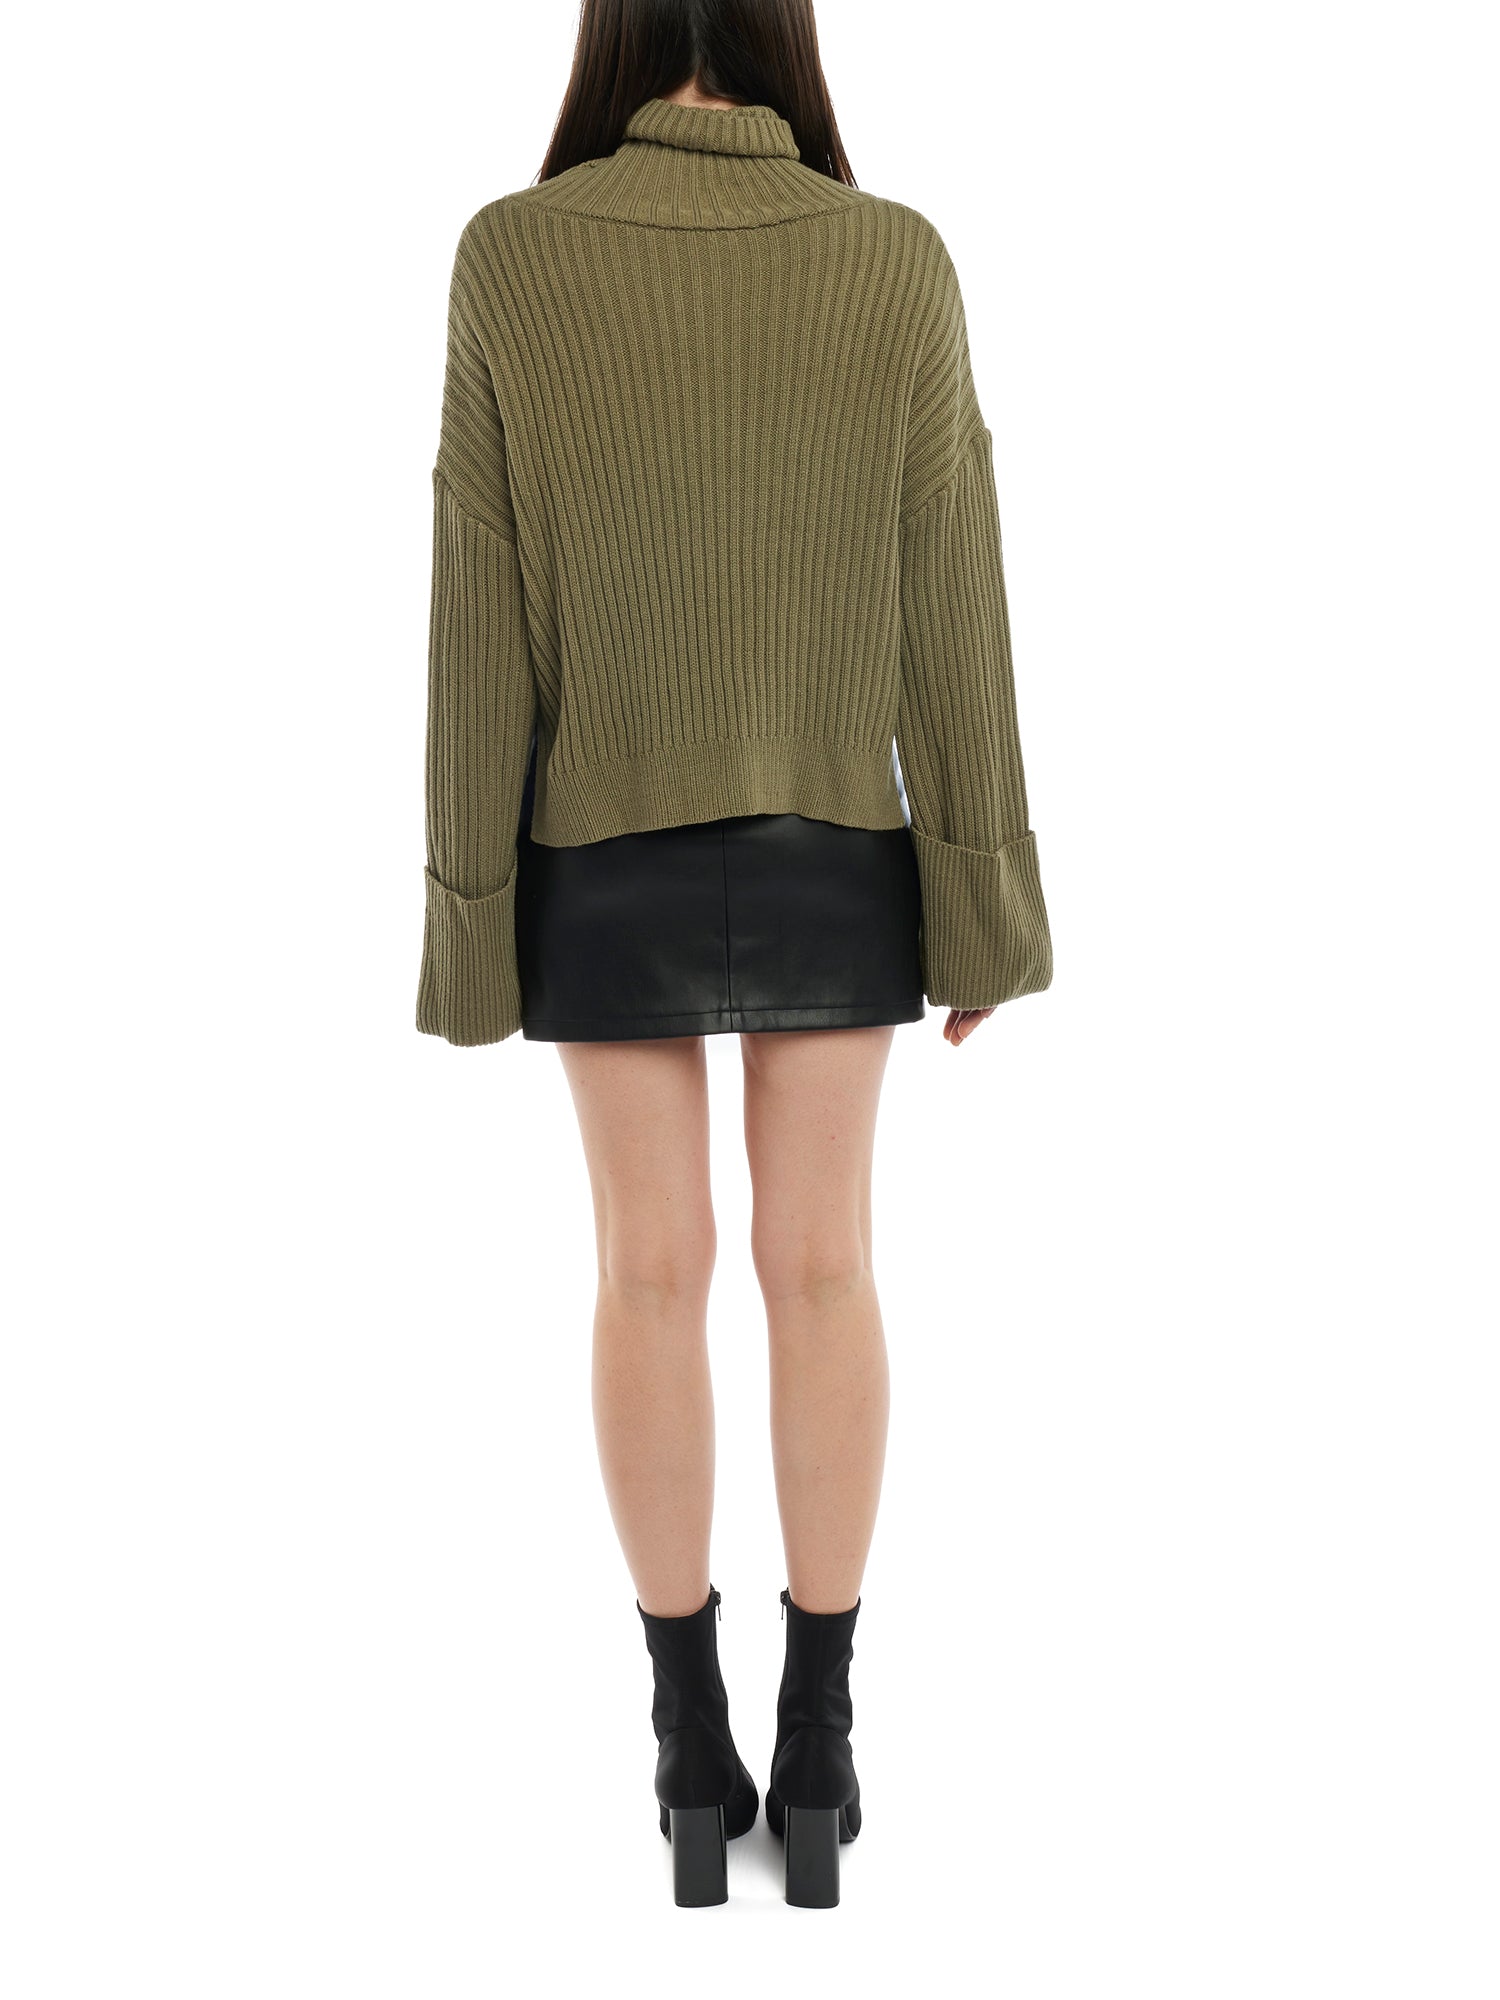 turtleneck sweater with a drop shoulder seam, large rolled cuffs, small side hem slits and a relaxed fit in olive